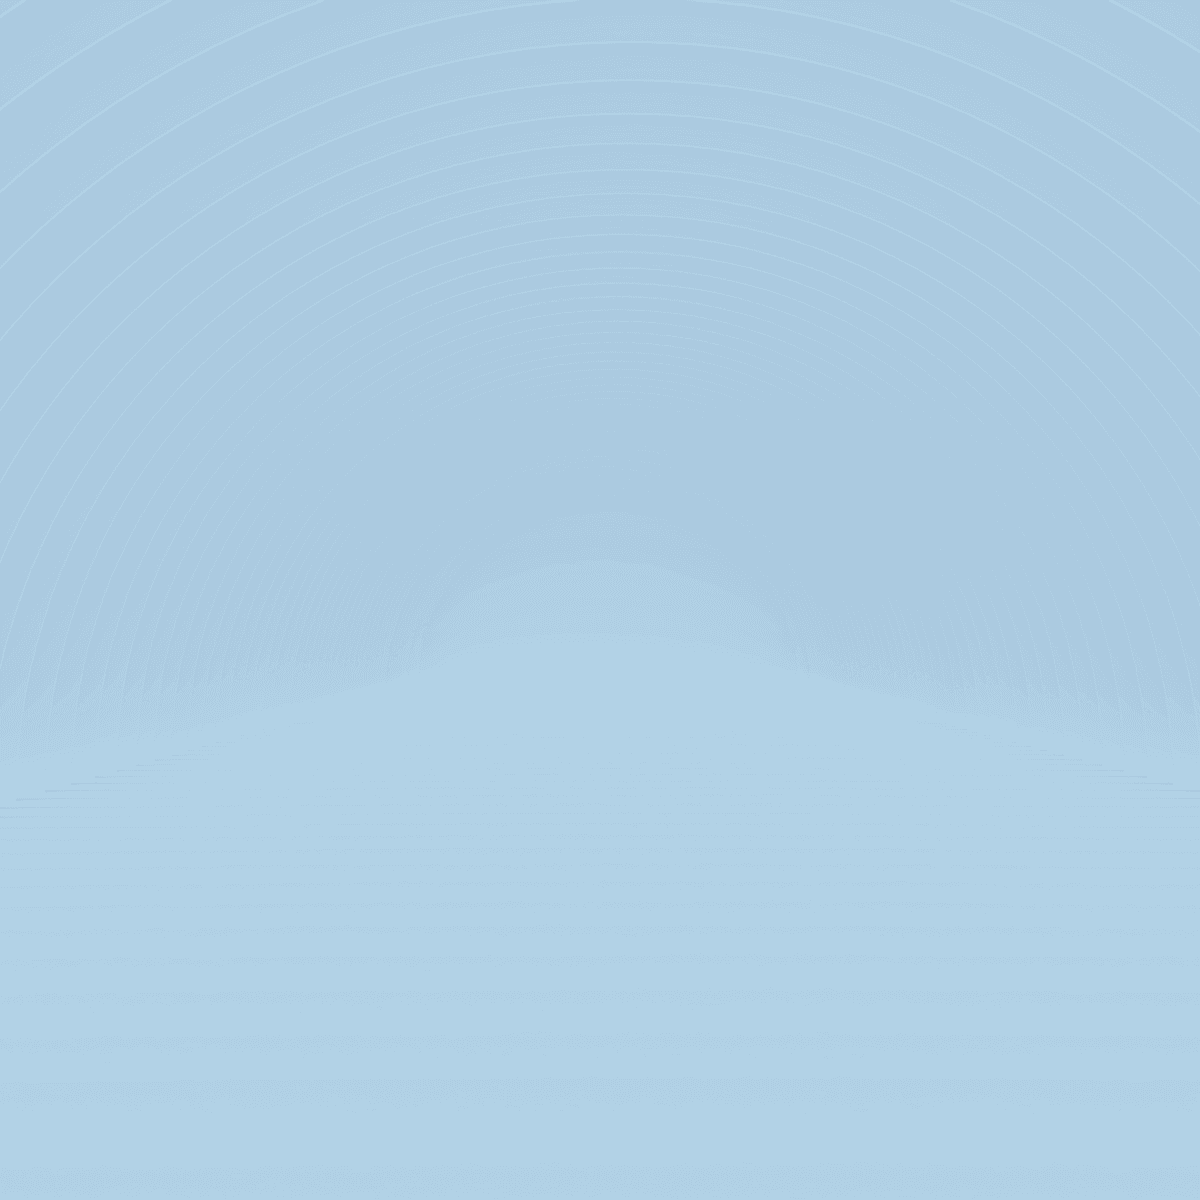 Abstract Blue Gray Tunnel